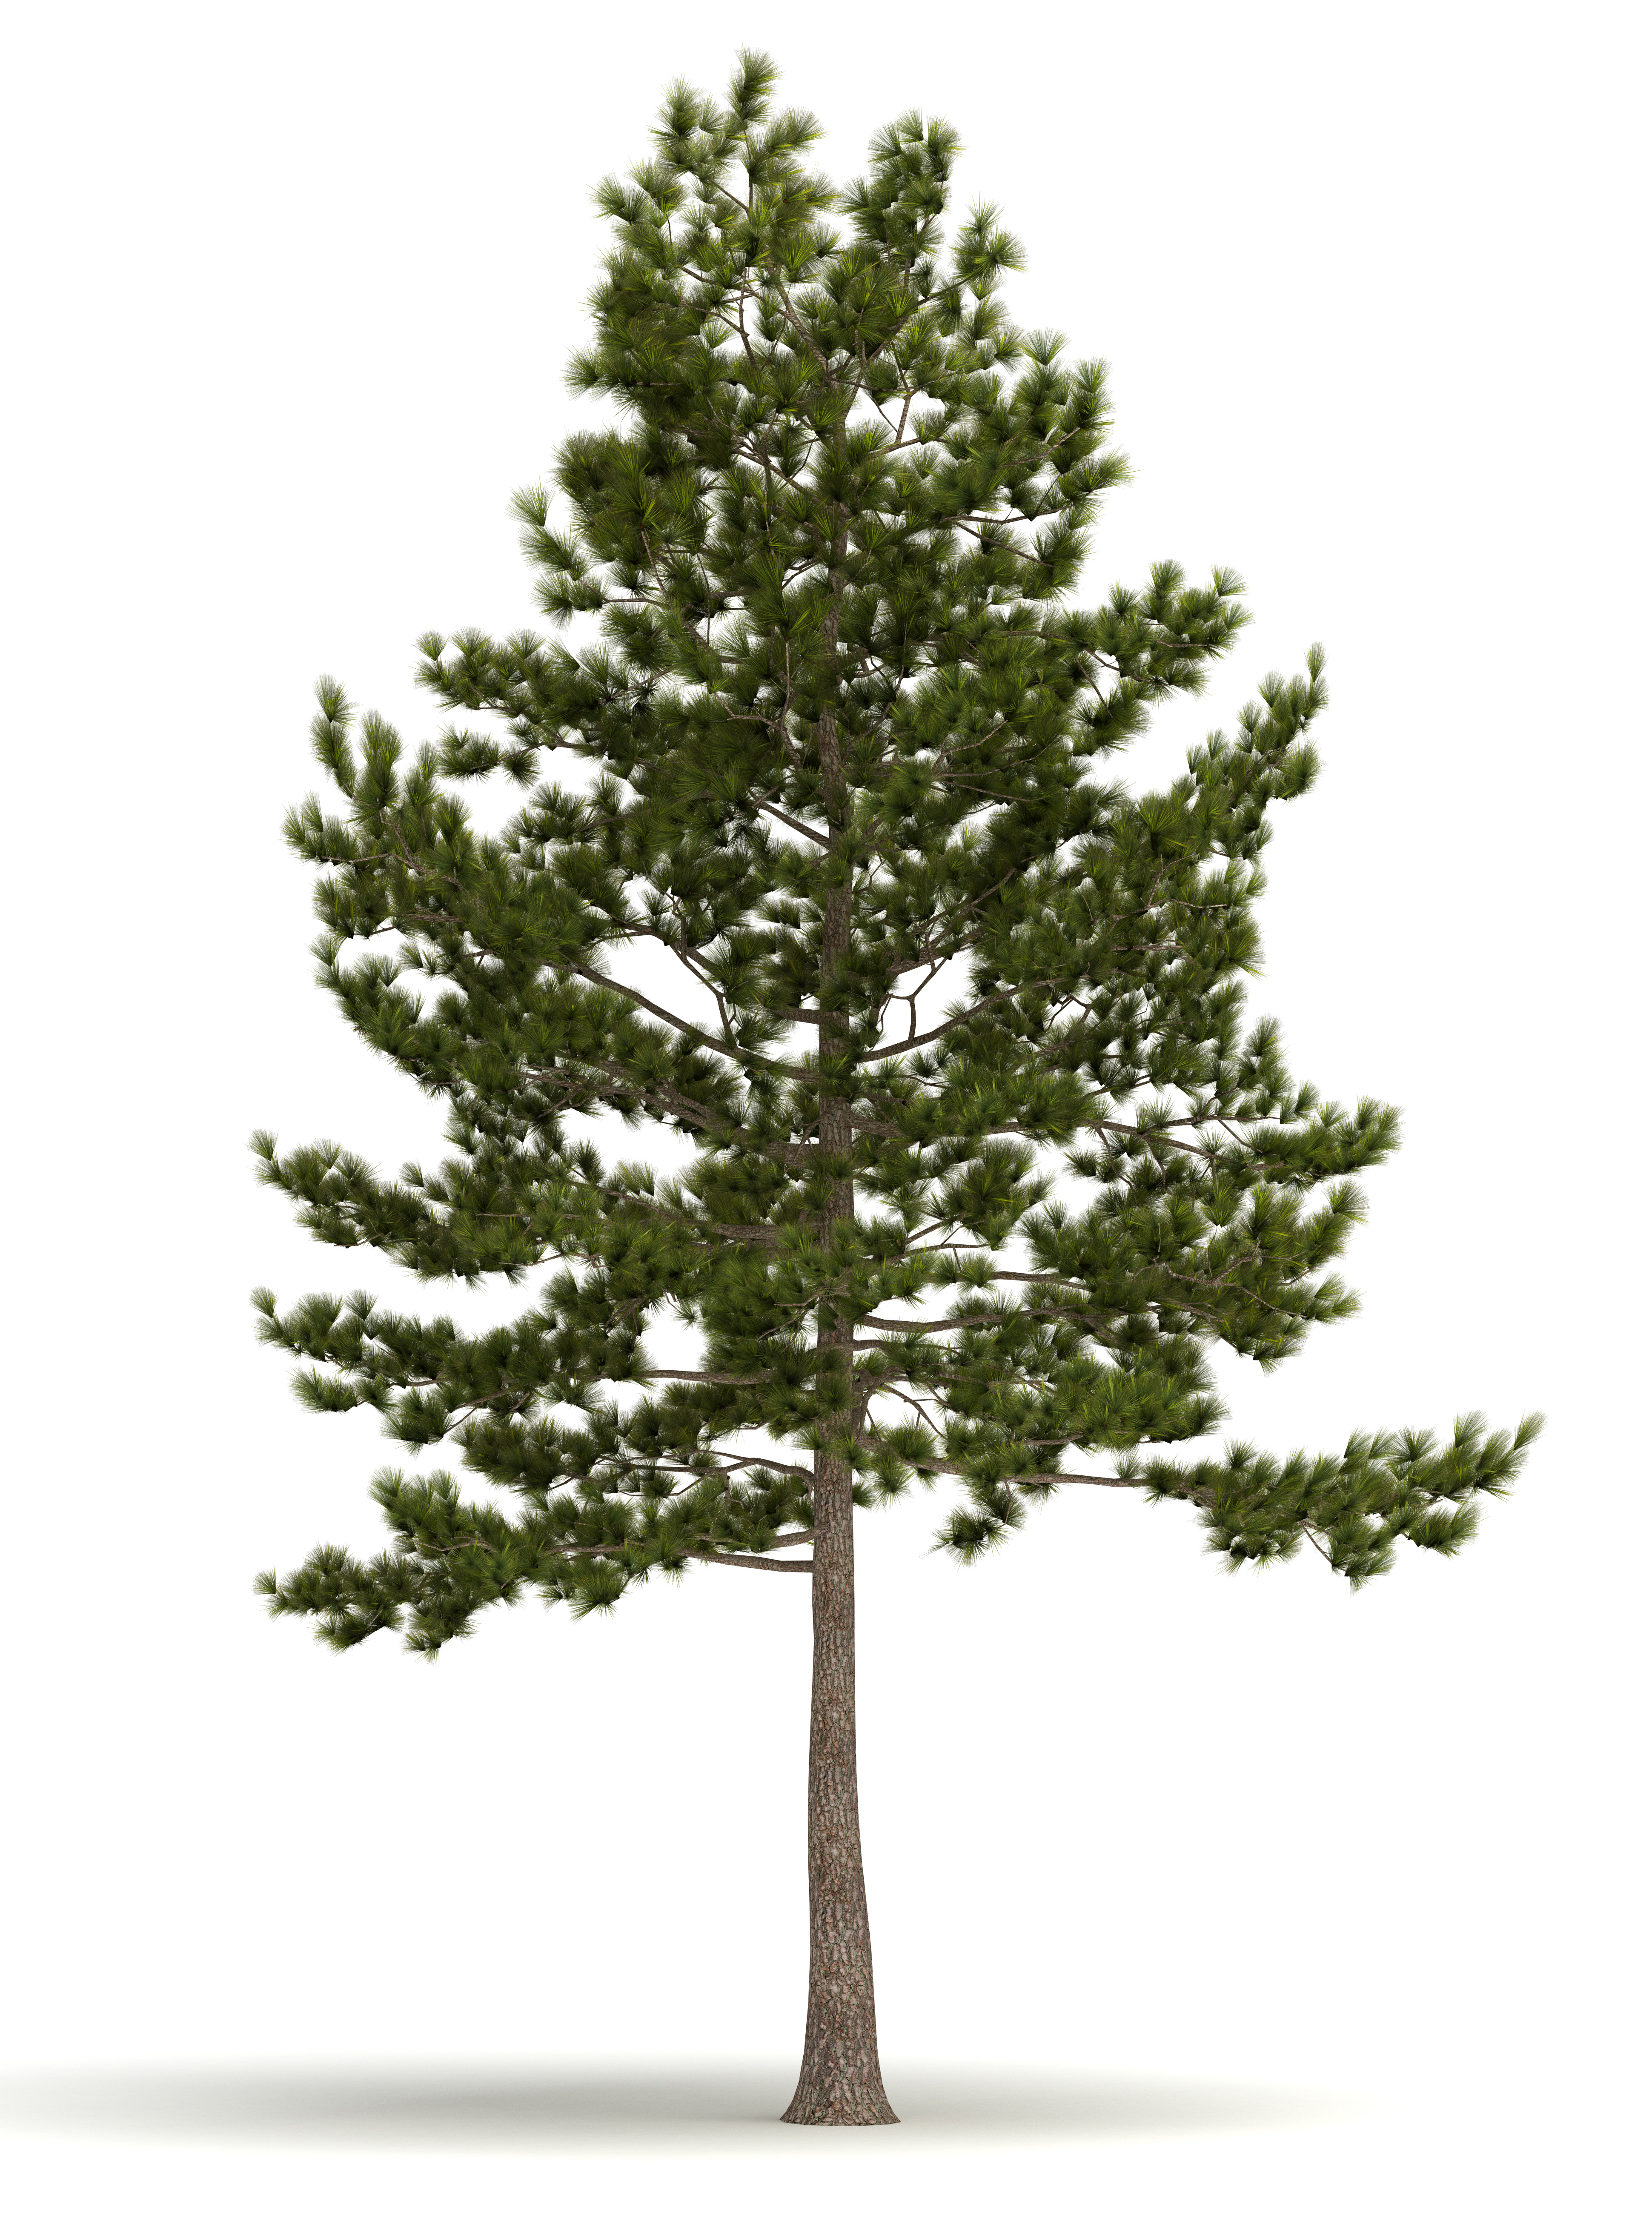 Images of Pine Tree | 3881x5220